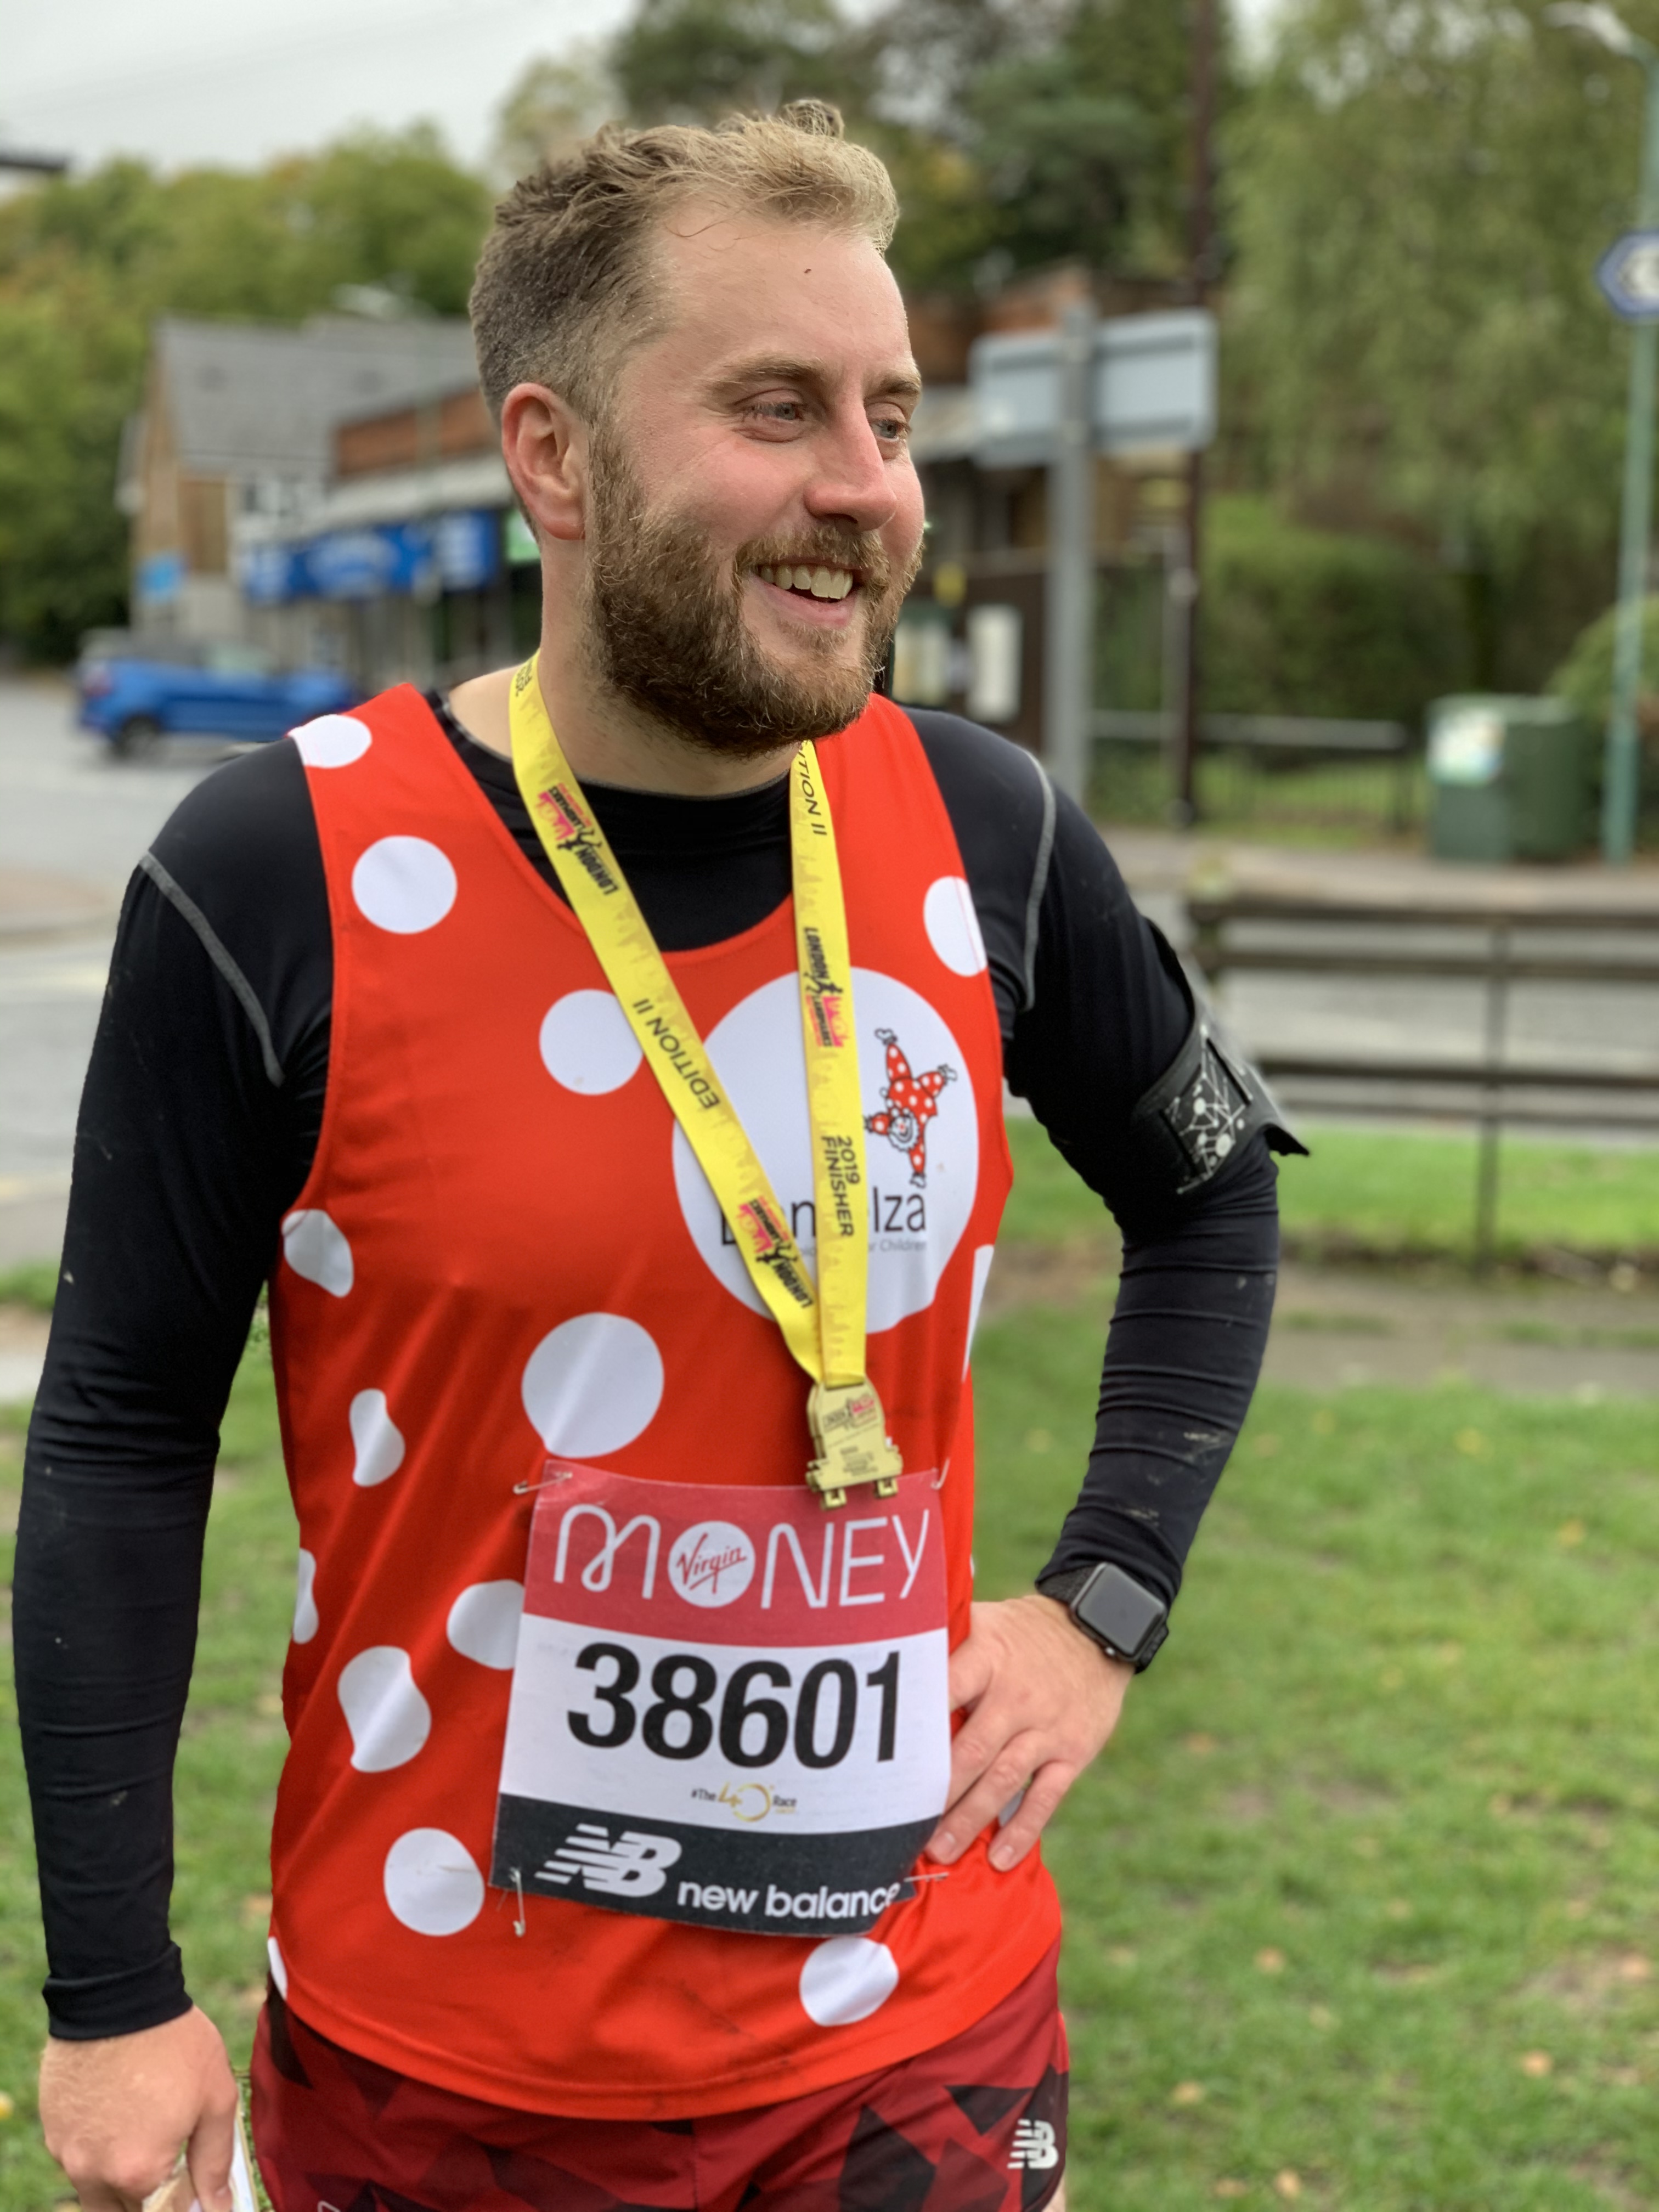 Gavin is wearing his Demelza dotty running vest over a black long sleeve top, wearing a medal.